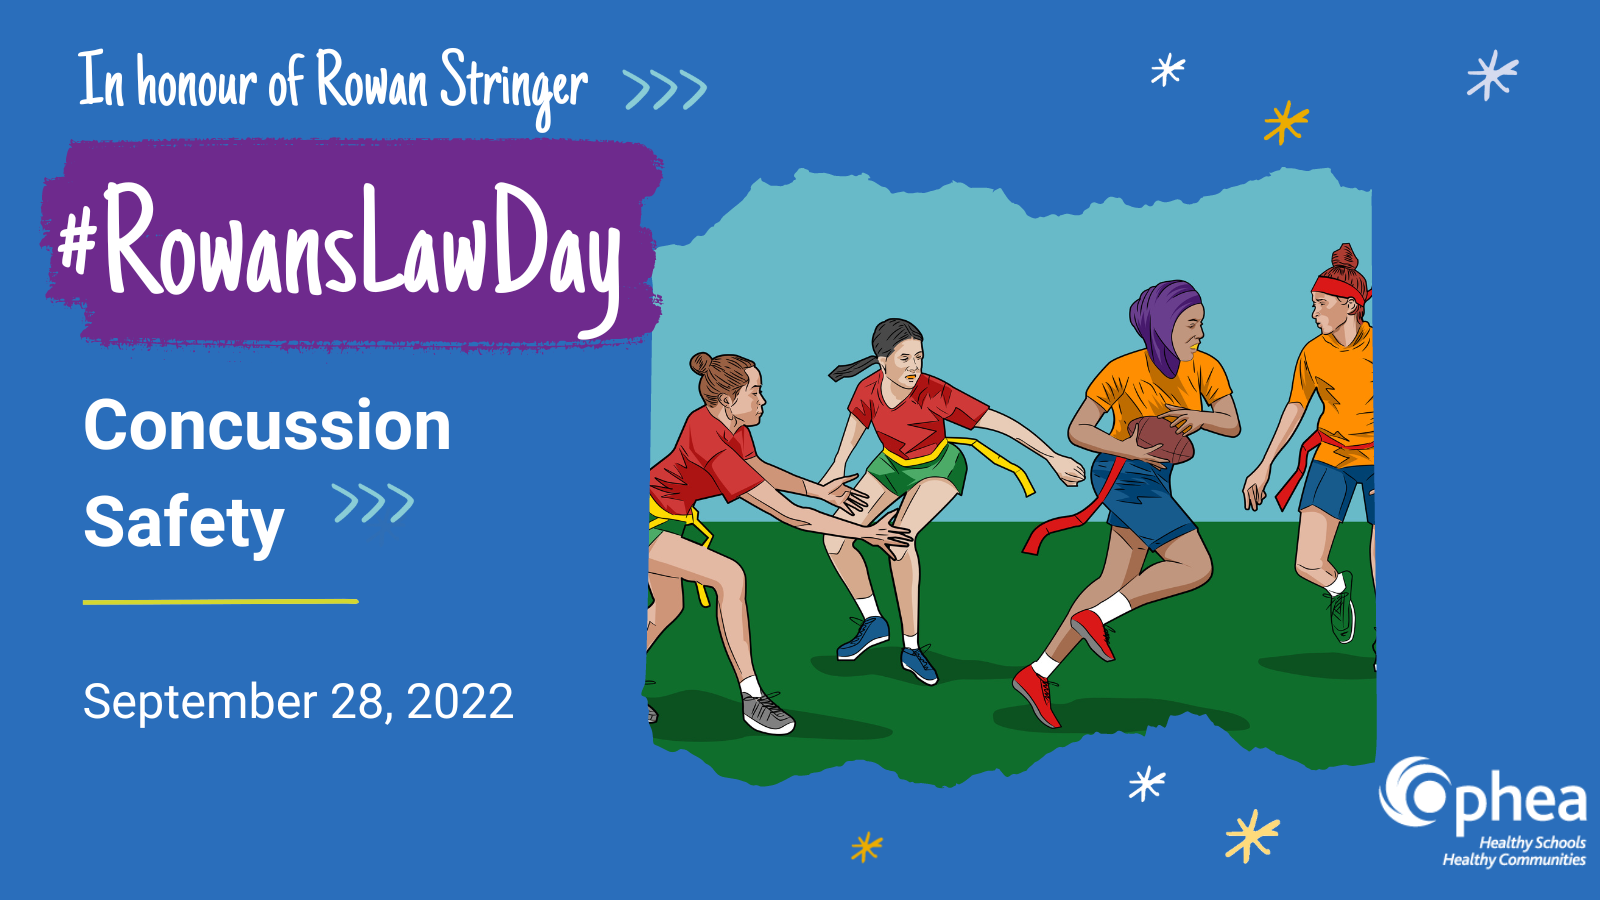 In honour of Rowan Stringer: Rowan's Law Day - Concussion Safety on September 28, 2022. Beside the text there is an illustration of students playing flag football.